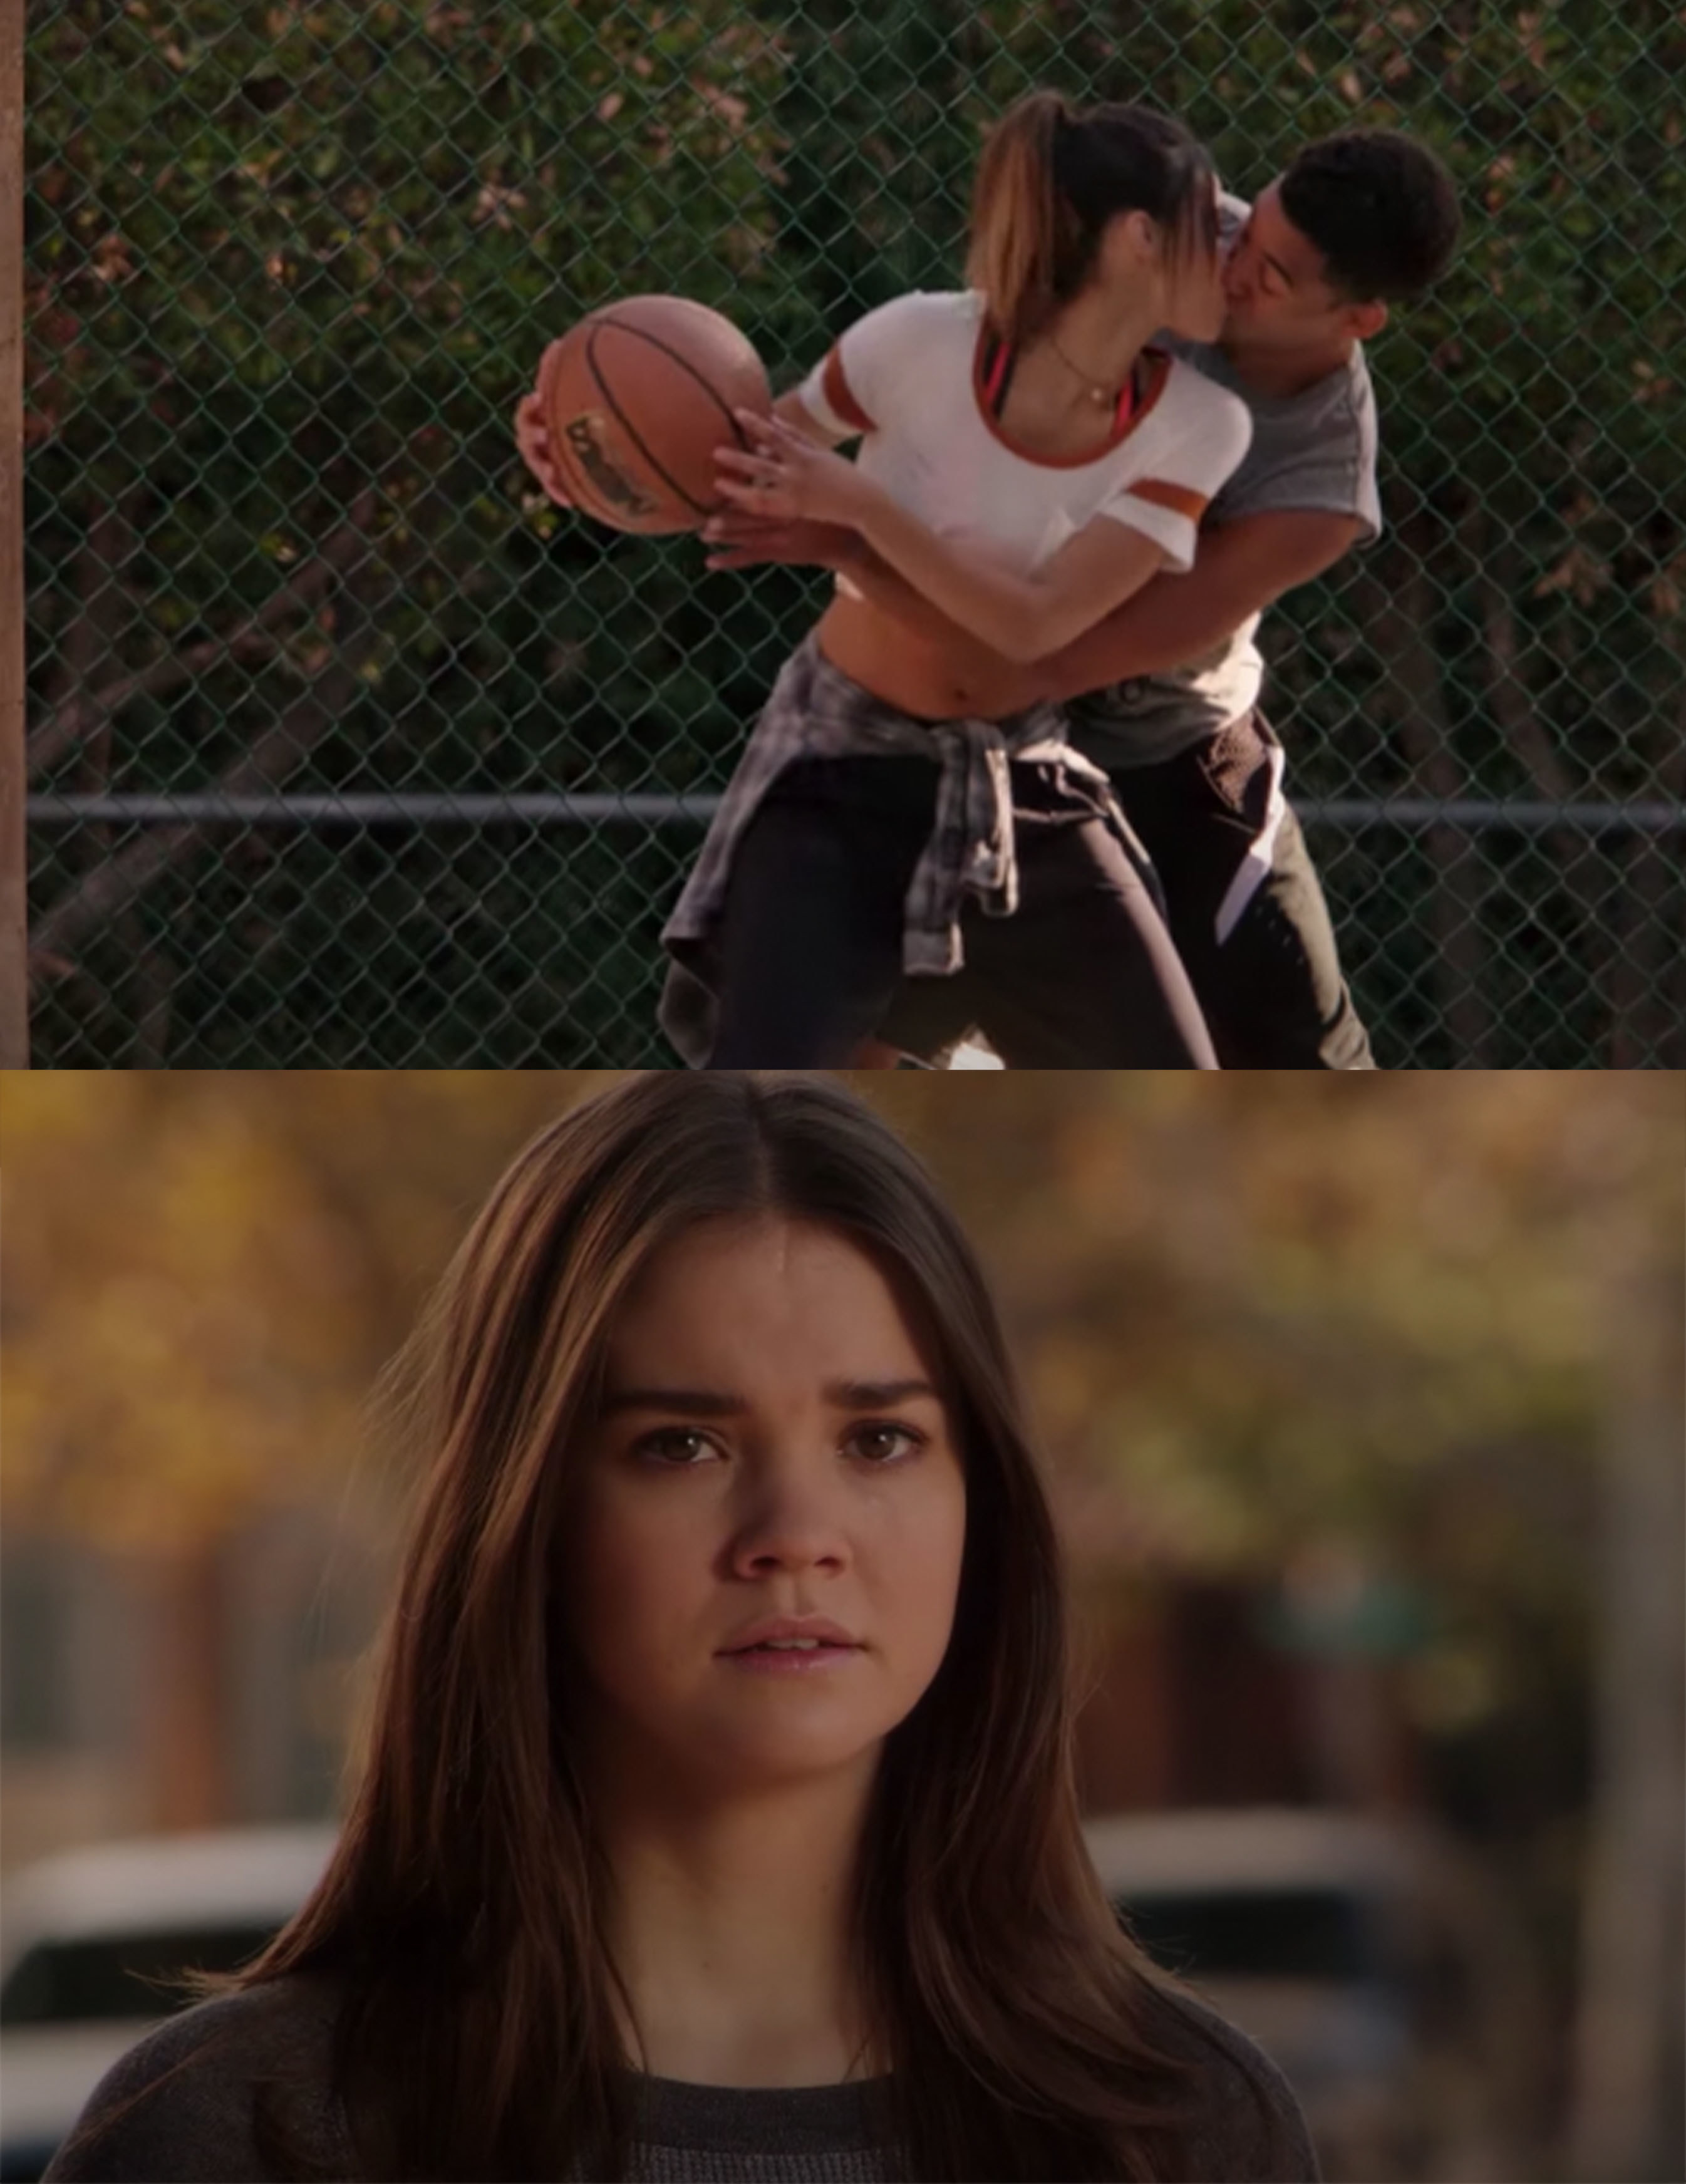 Callie watches from a distance as AJ and girl kiss on basketball court